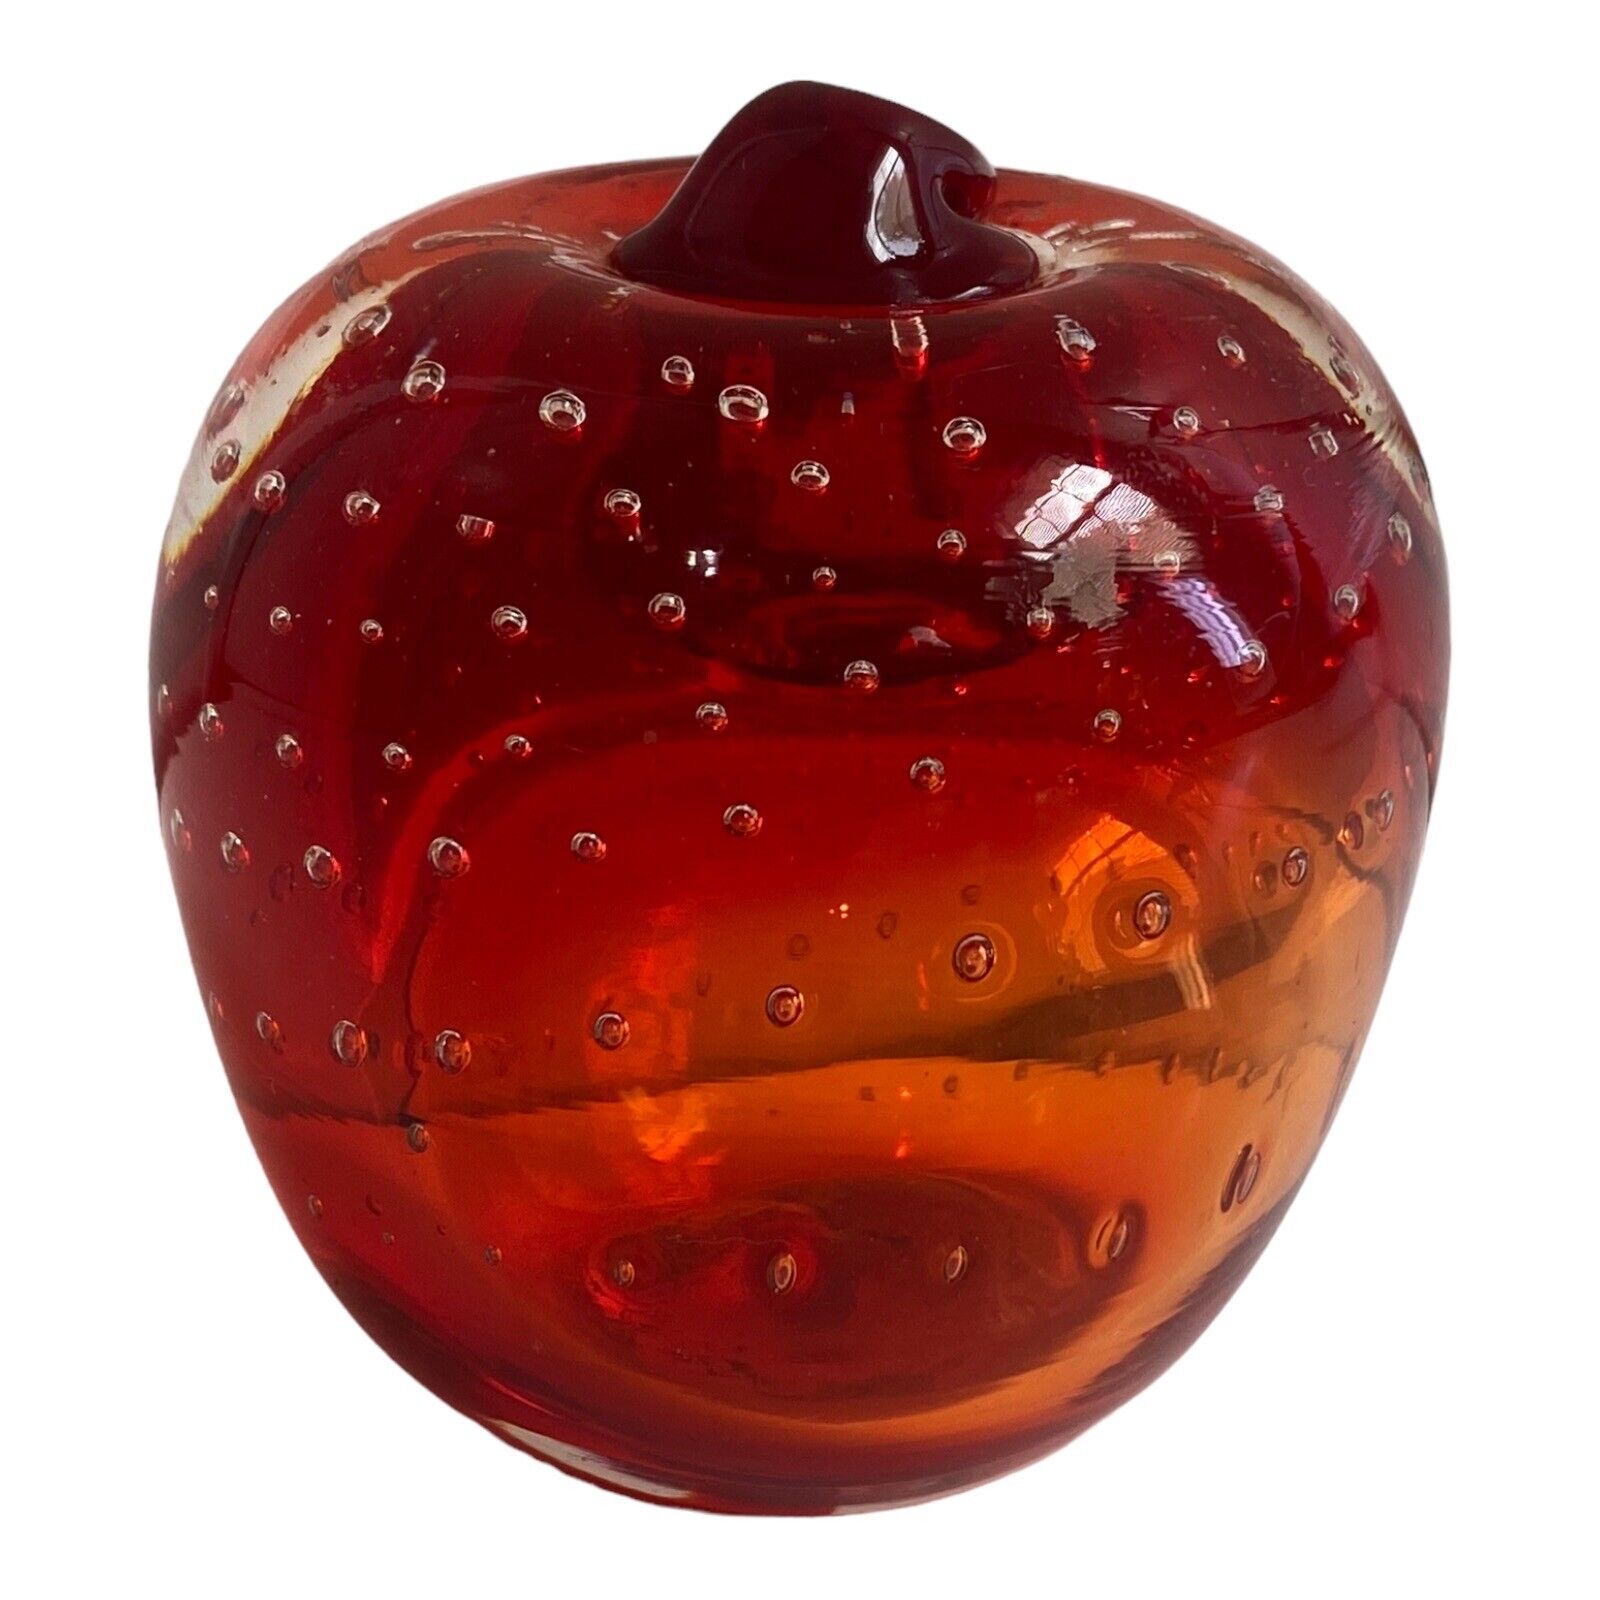 VTG Hand Blown Red Glass Apple Paperweight Controlled Bubbles Bullicante Japan